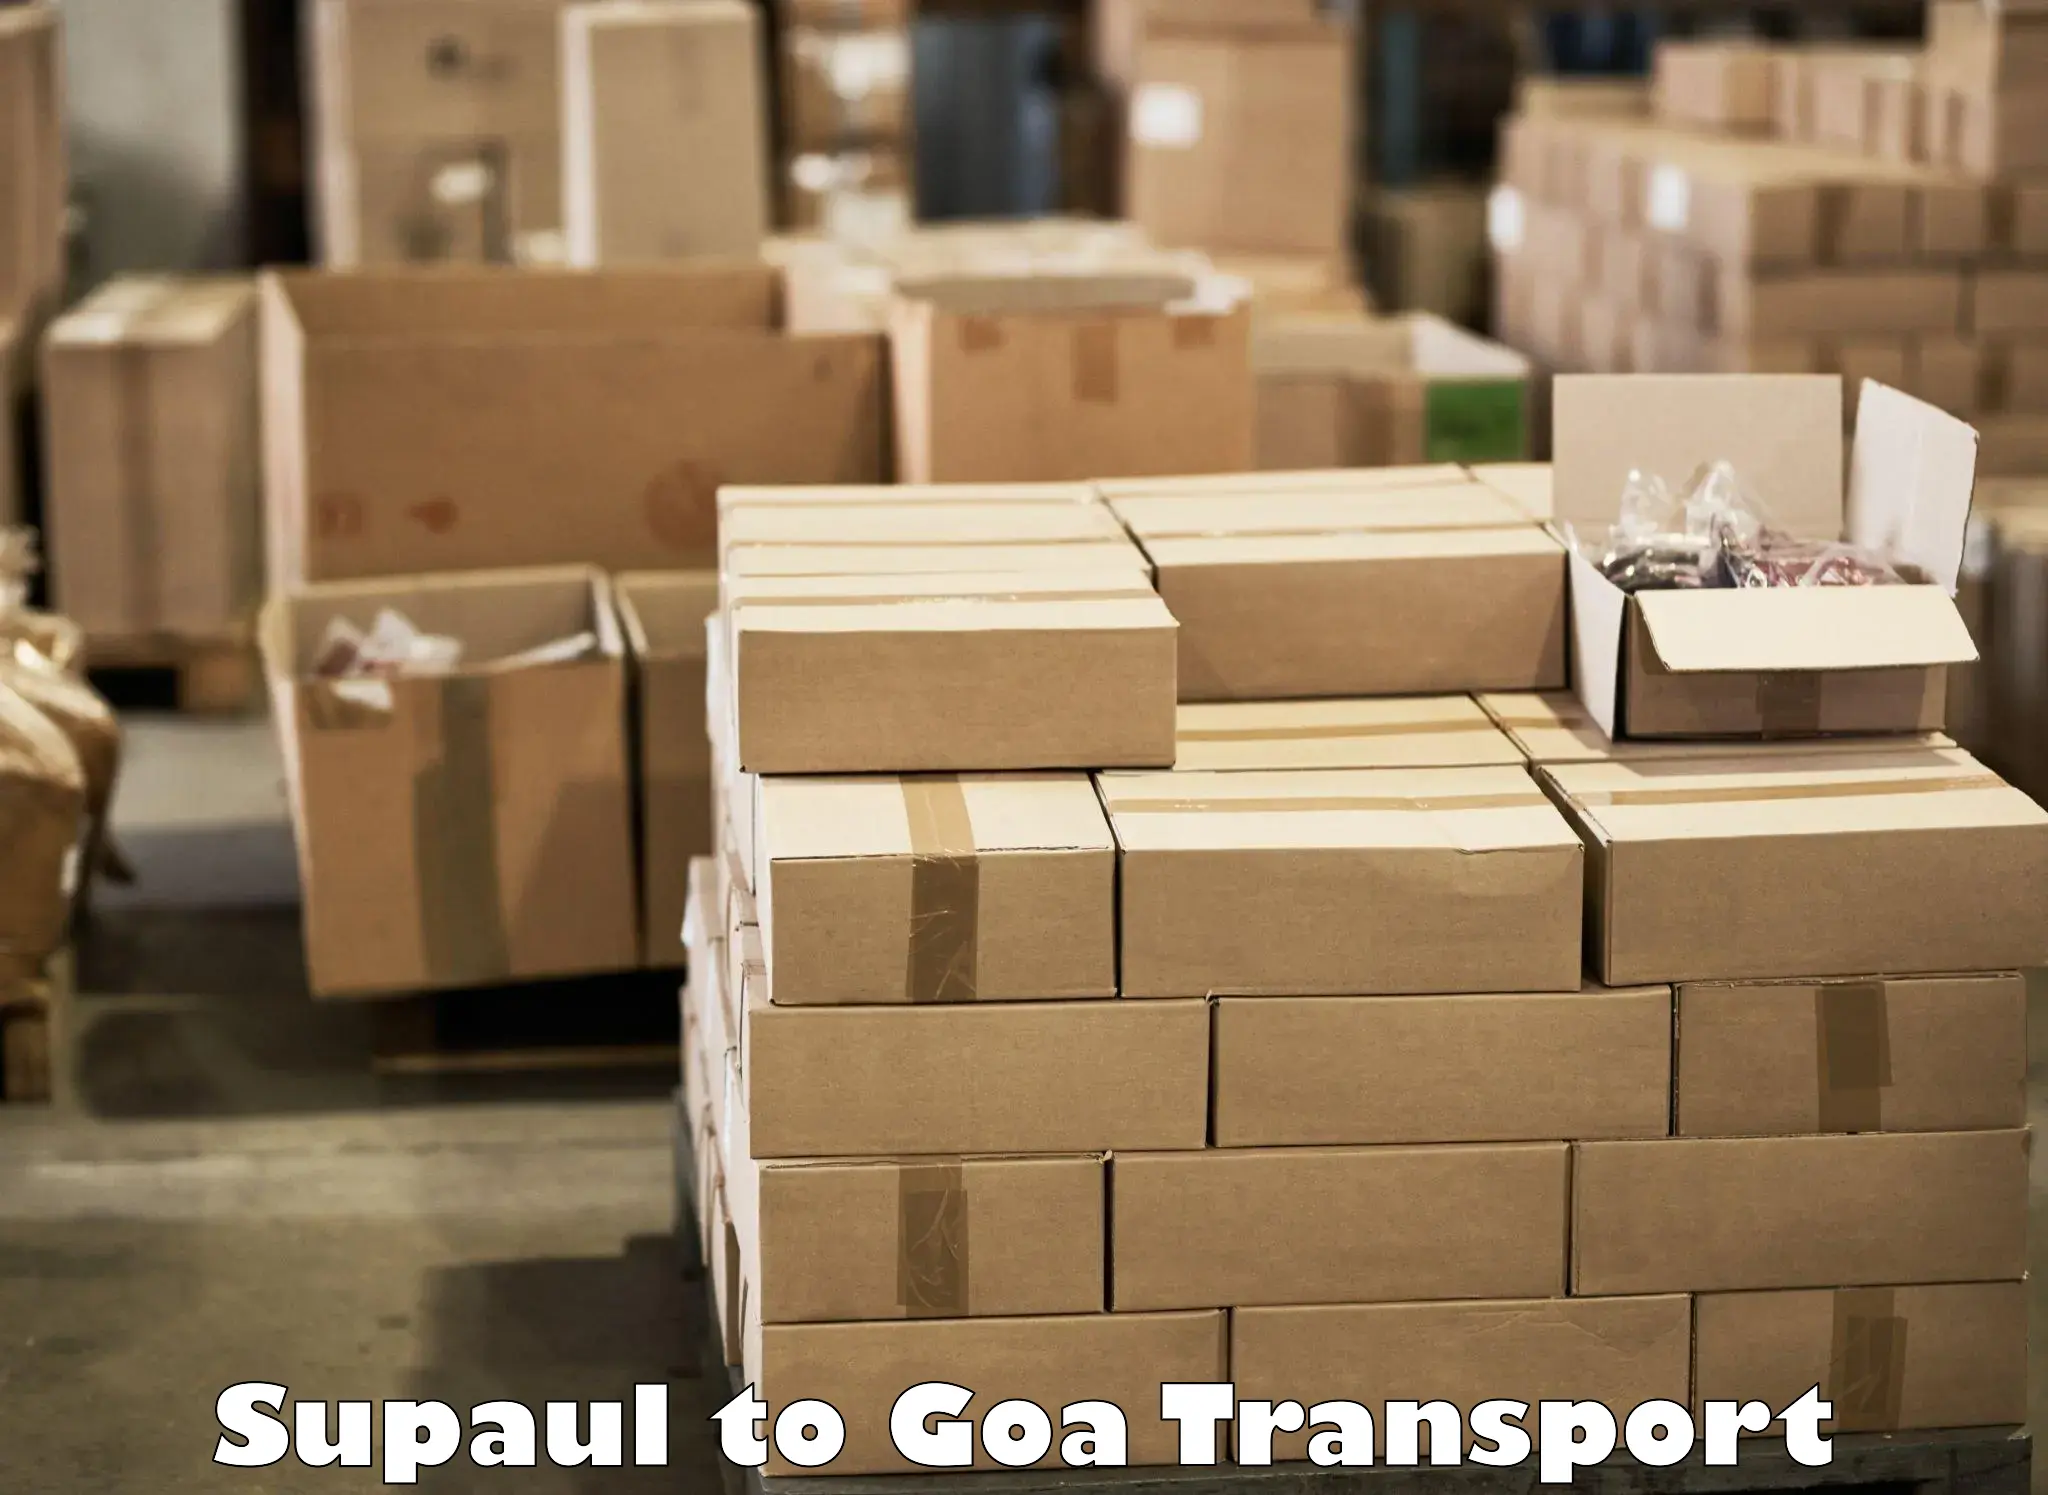 Transport bike from one state to another Supaul to Goa University